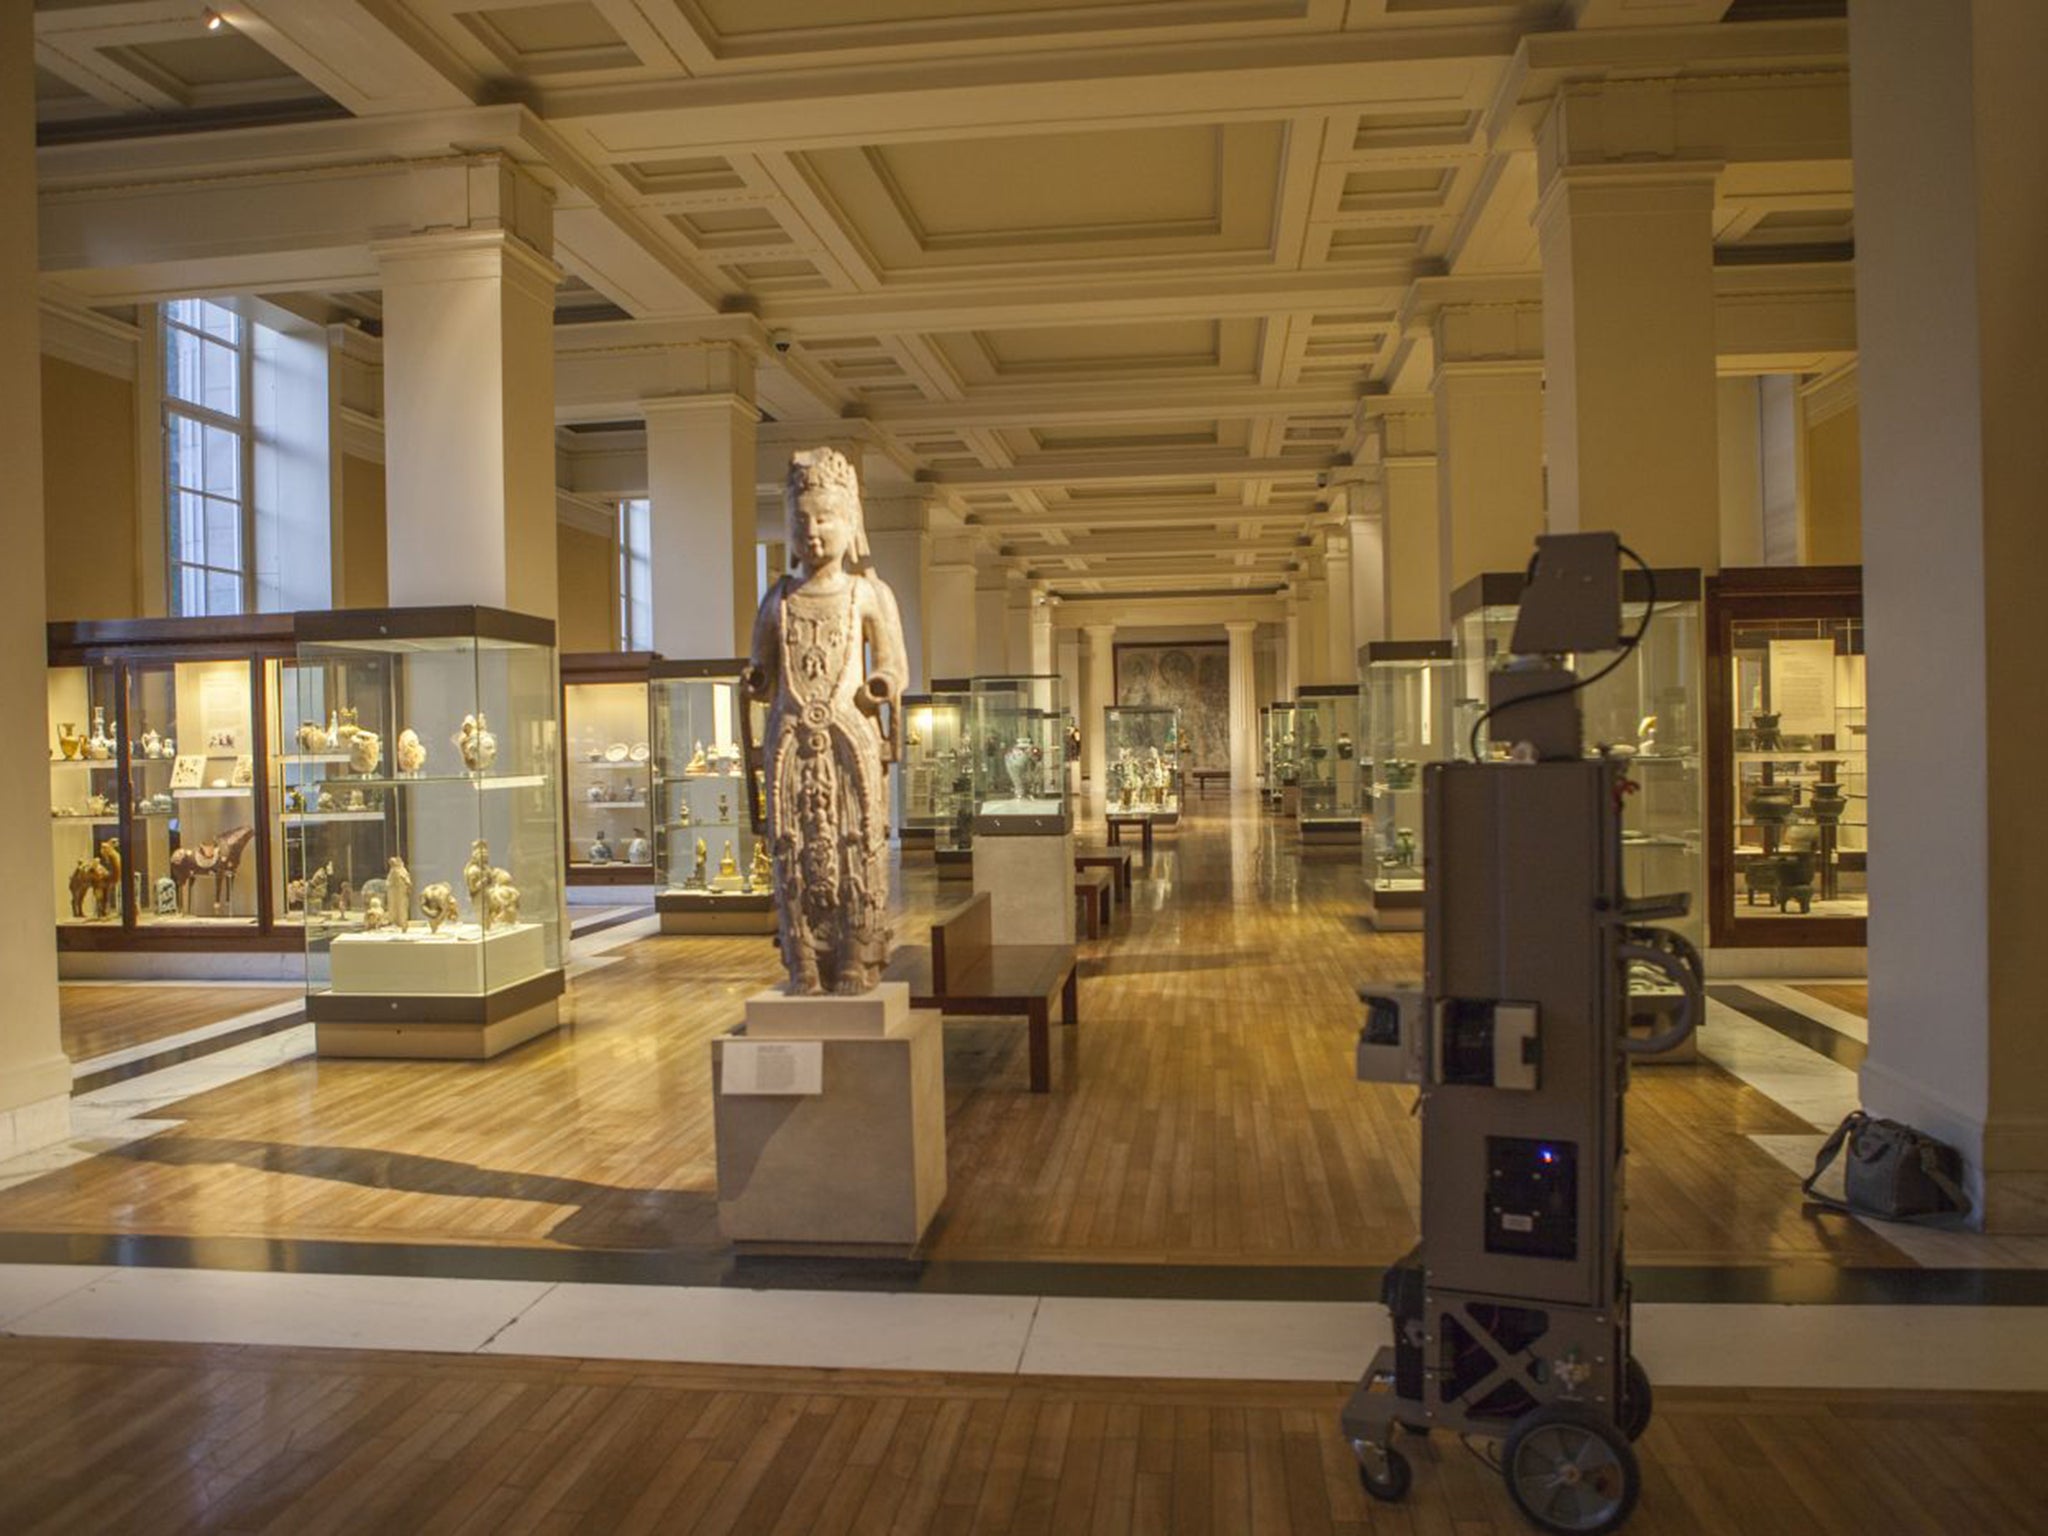 'Many of the British Museum's exhibits benefit from colonial looting in the distant past'